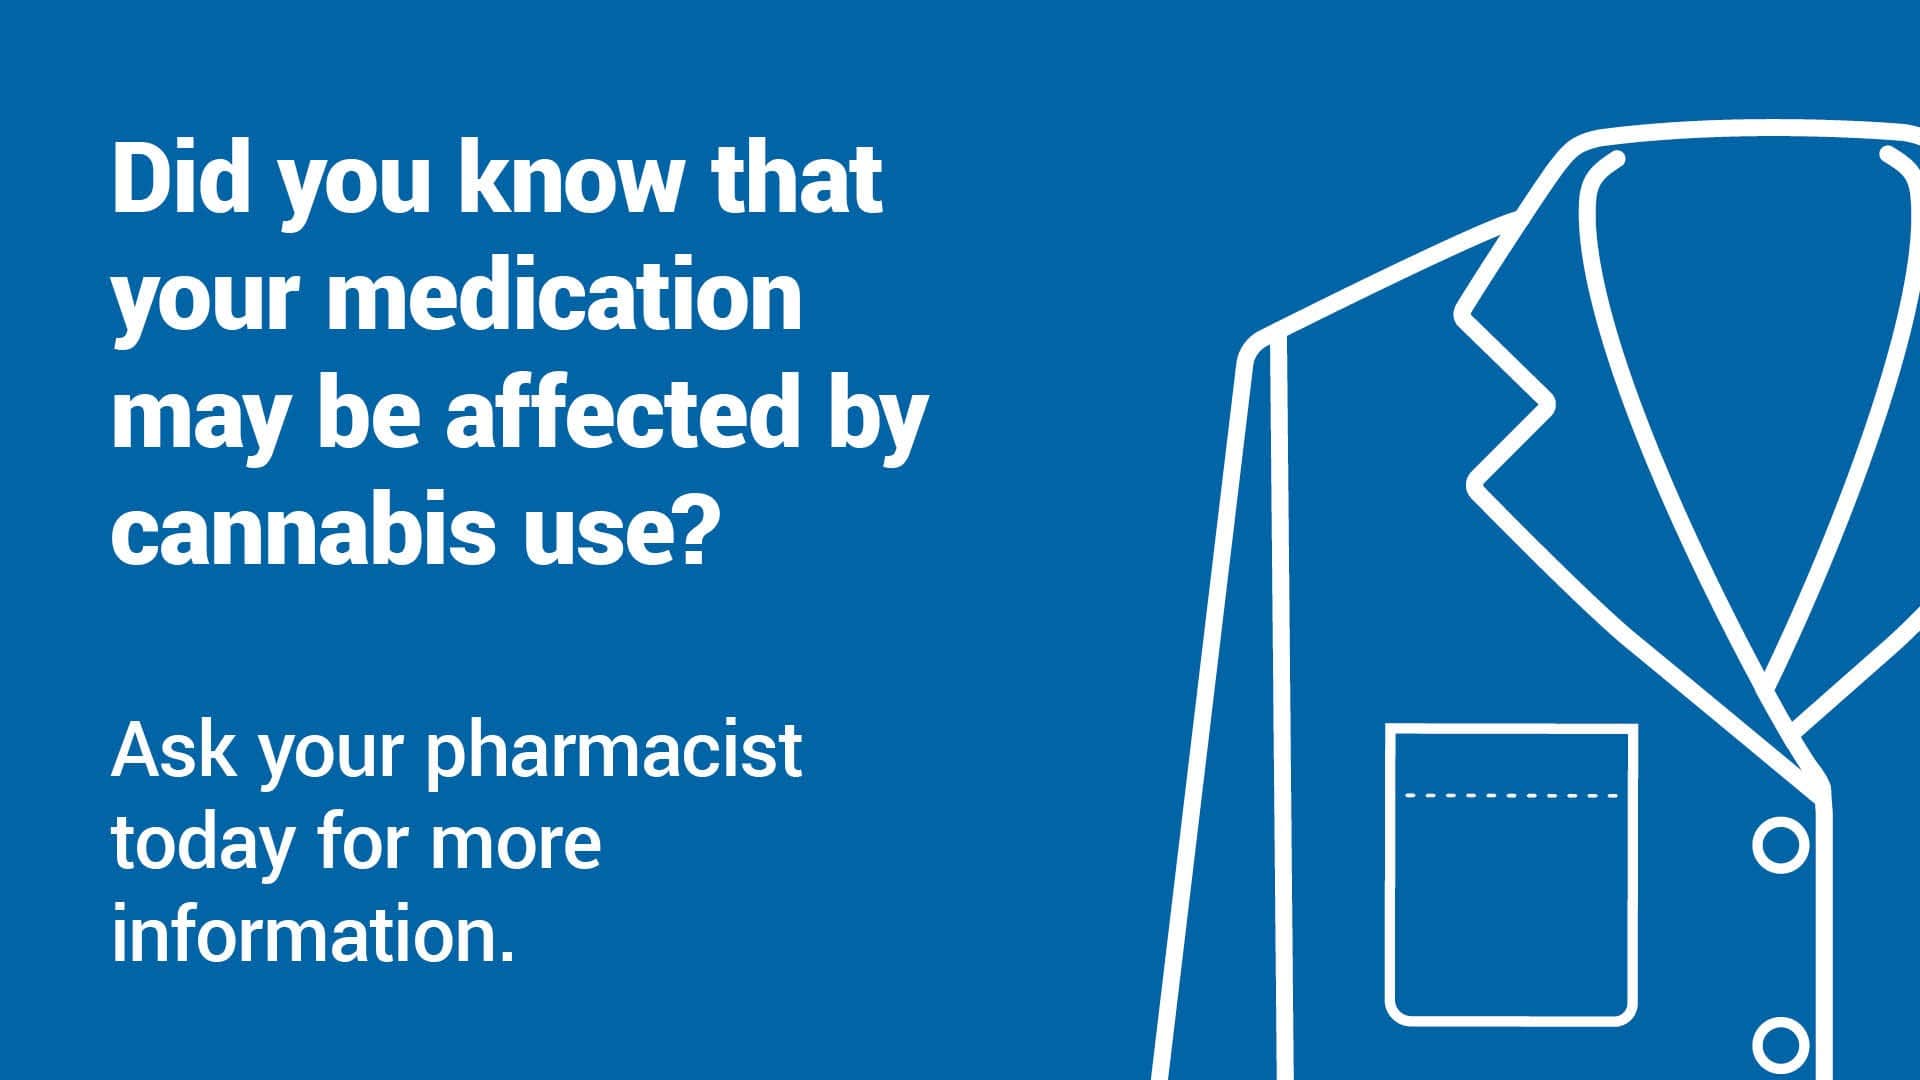 Did you know that your medication may be affected by cannabis use